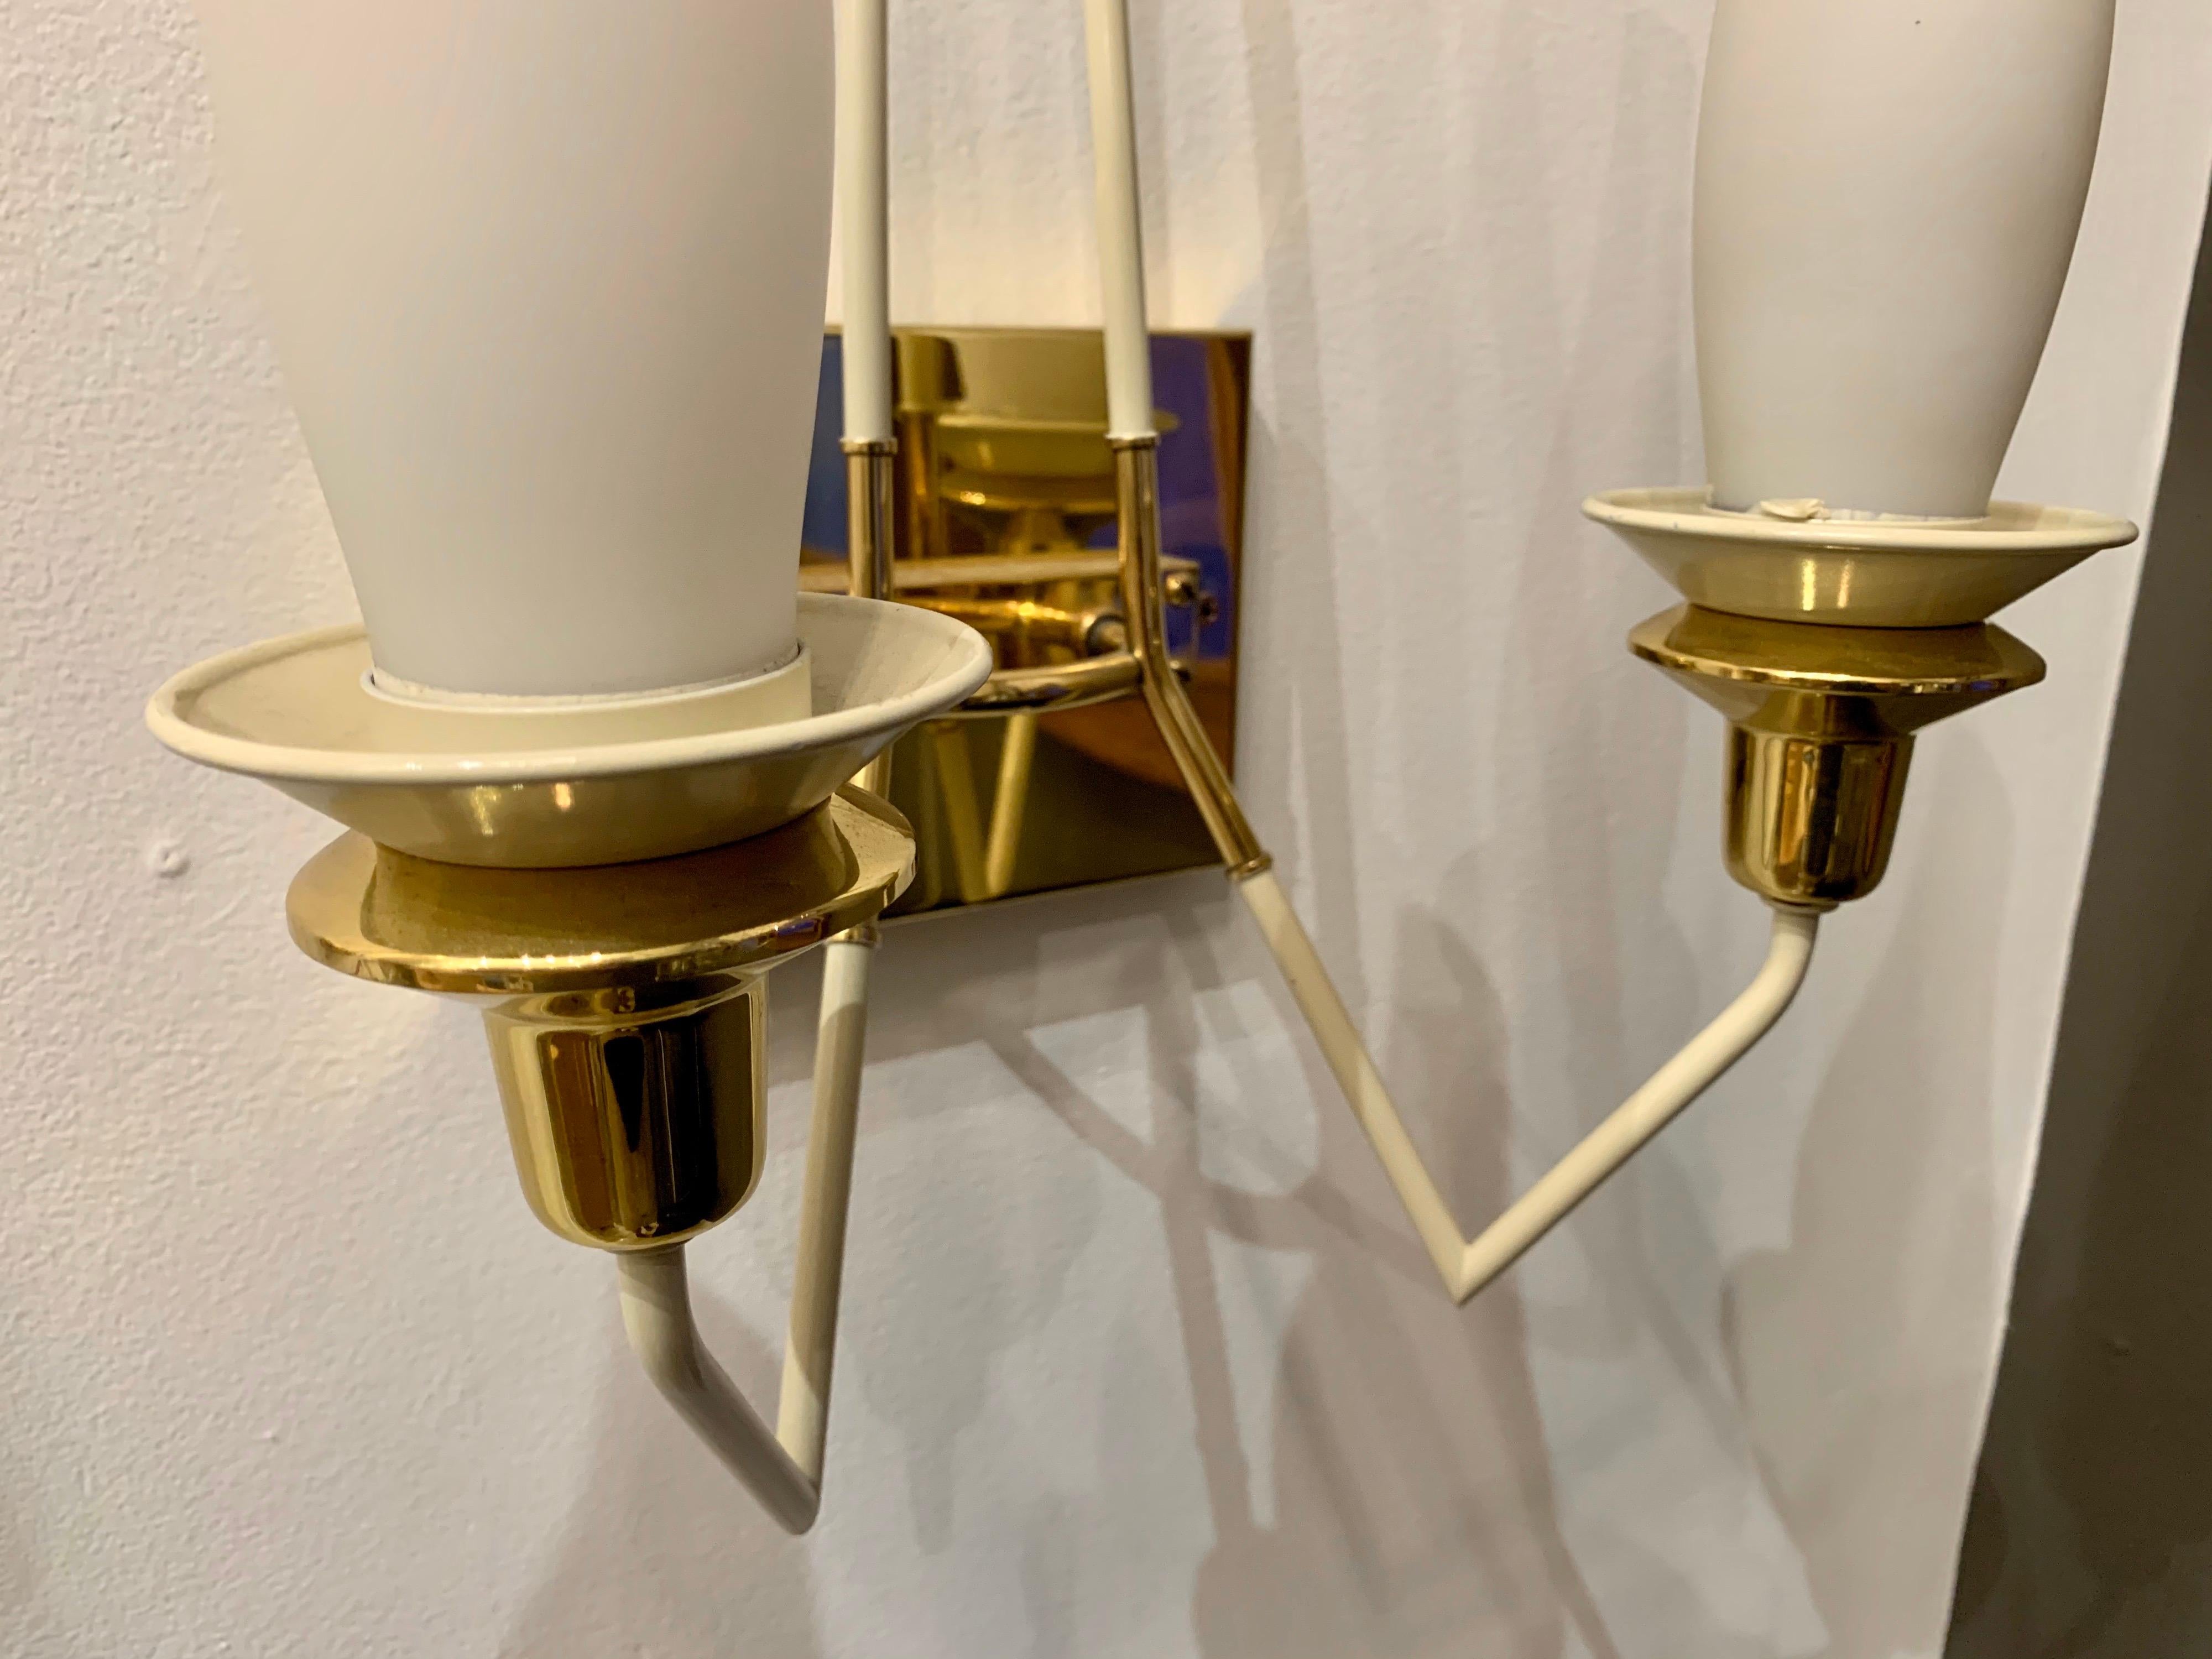 Pair of Mid-Century Modern Stilnovo wall sconces in high polished brass and off-white arrow-shaped enamel details. Each sconce has two frosted glass diffusers with two sockets. Wattage per sconce (25W per socket and up to 40W per socket if desired).